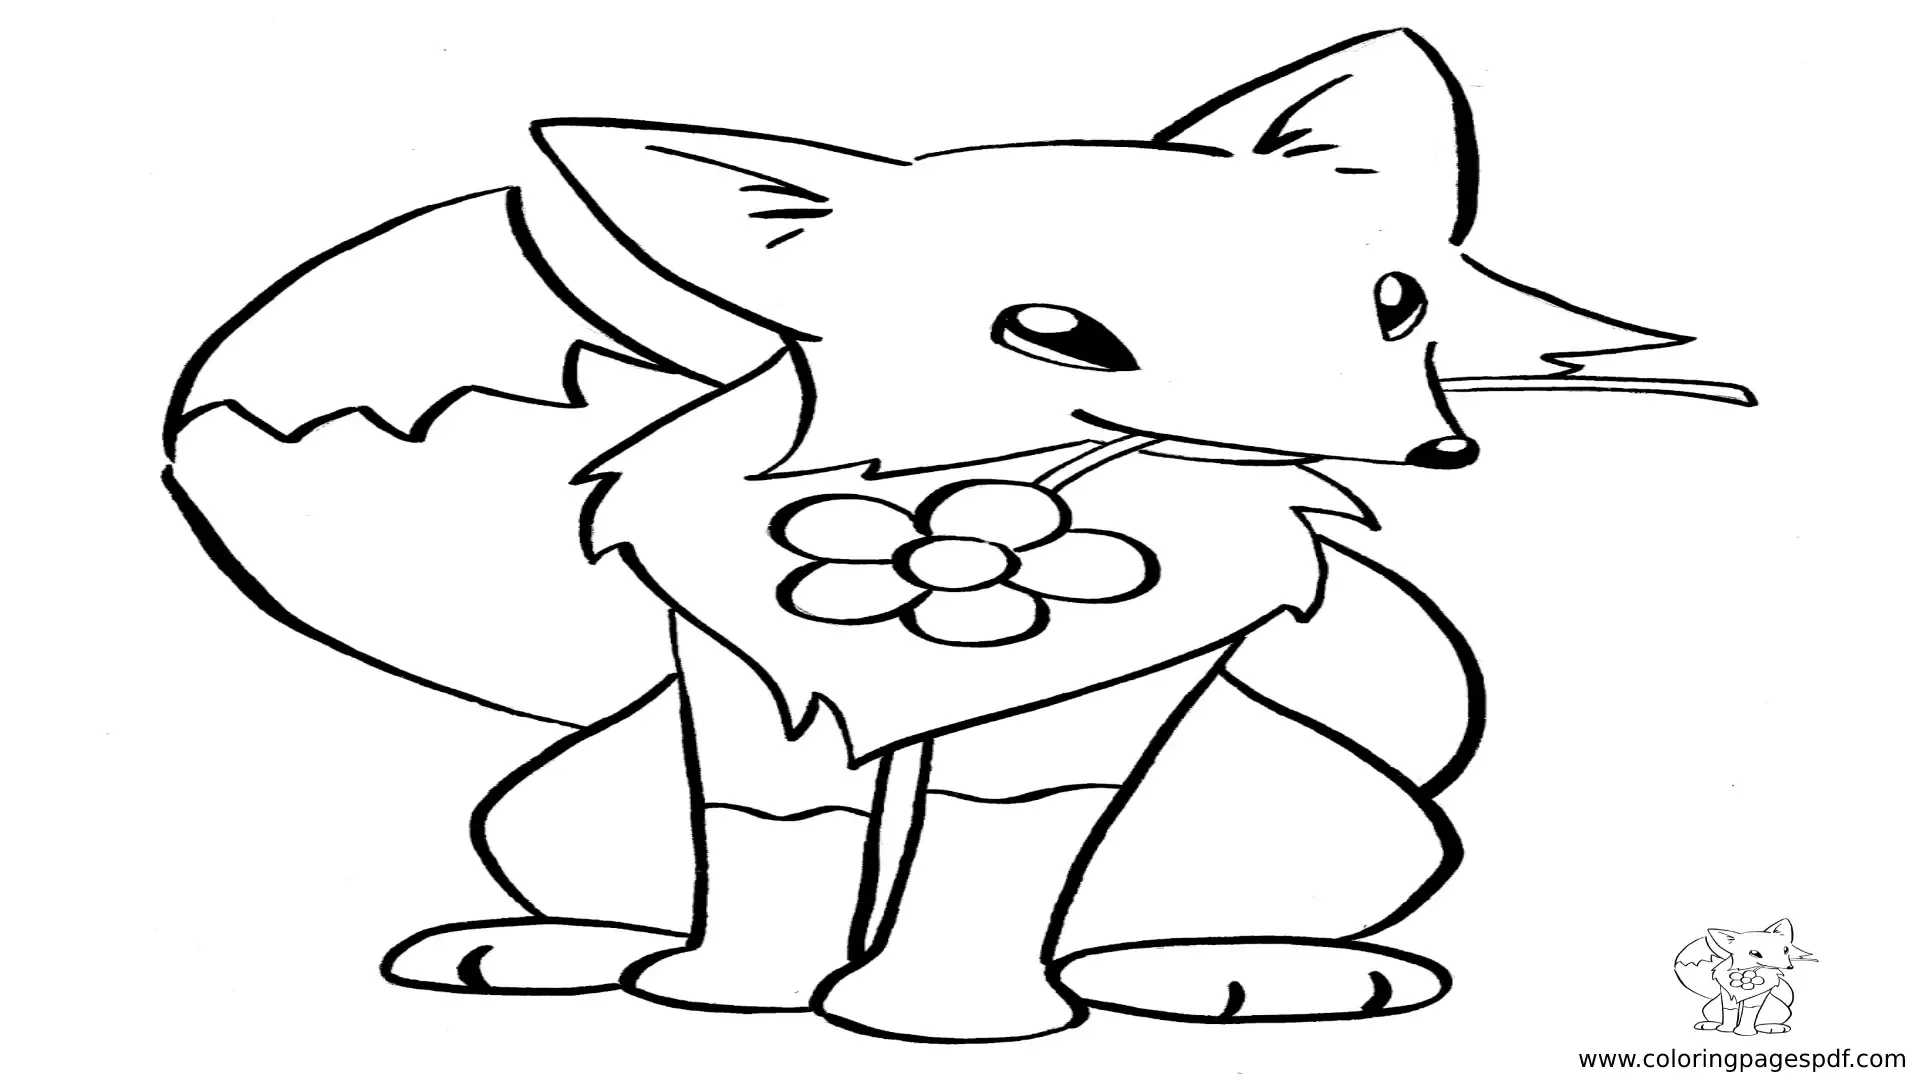 Coloring Pages Of A Fox Giving A Flower